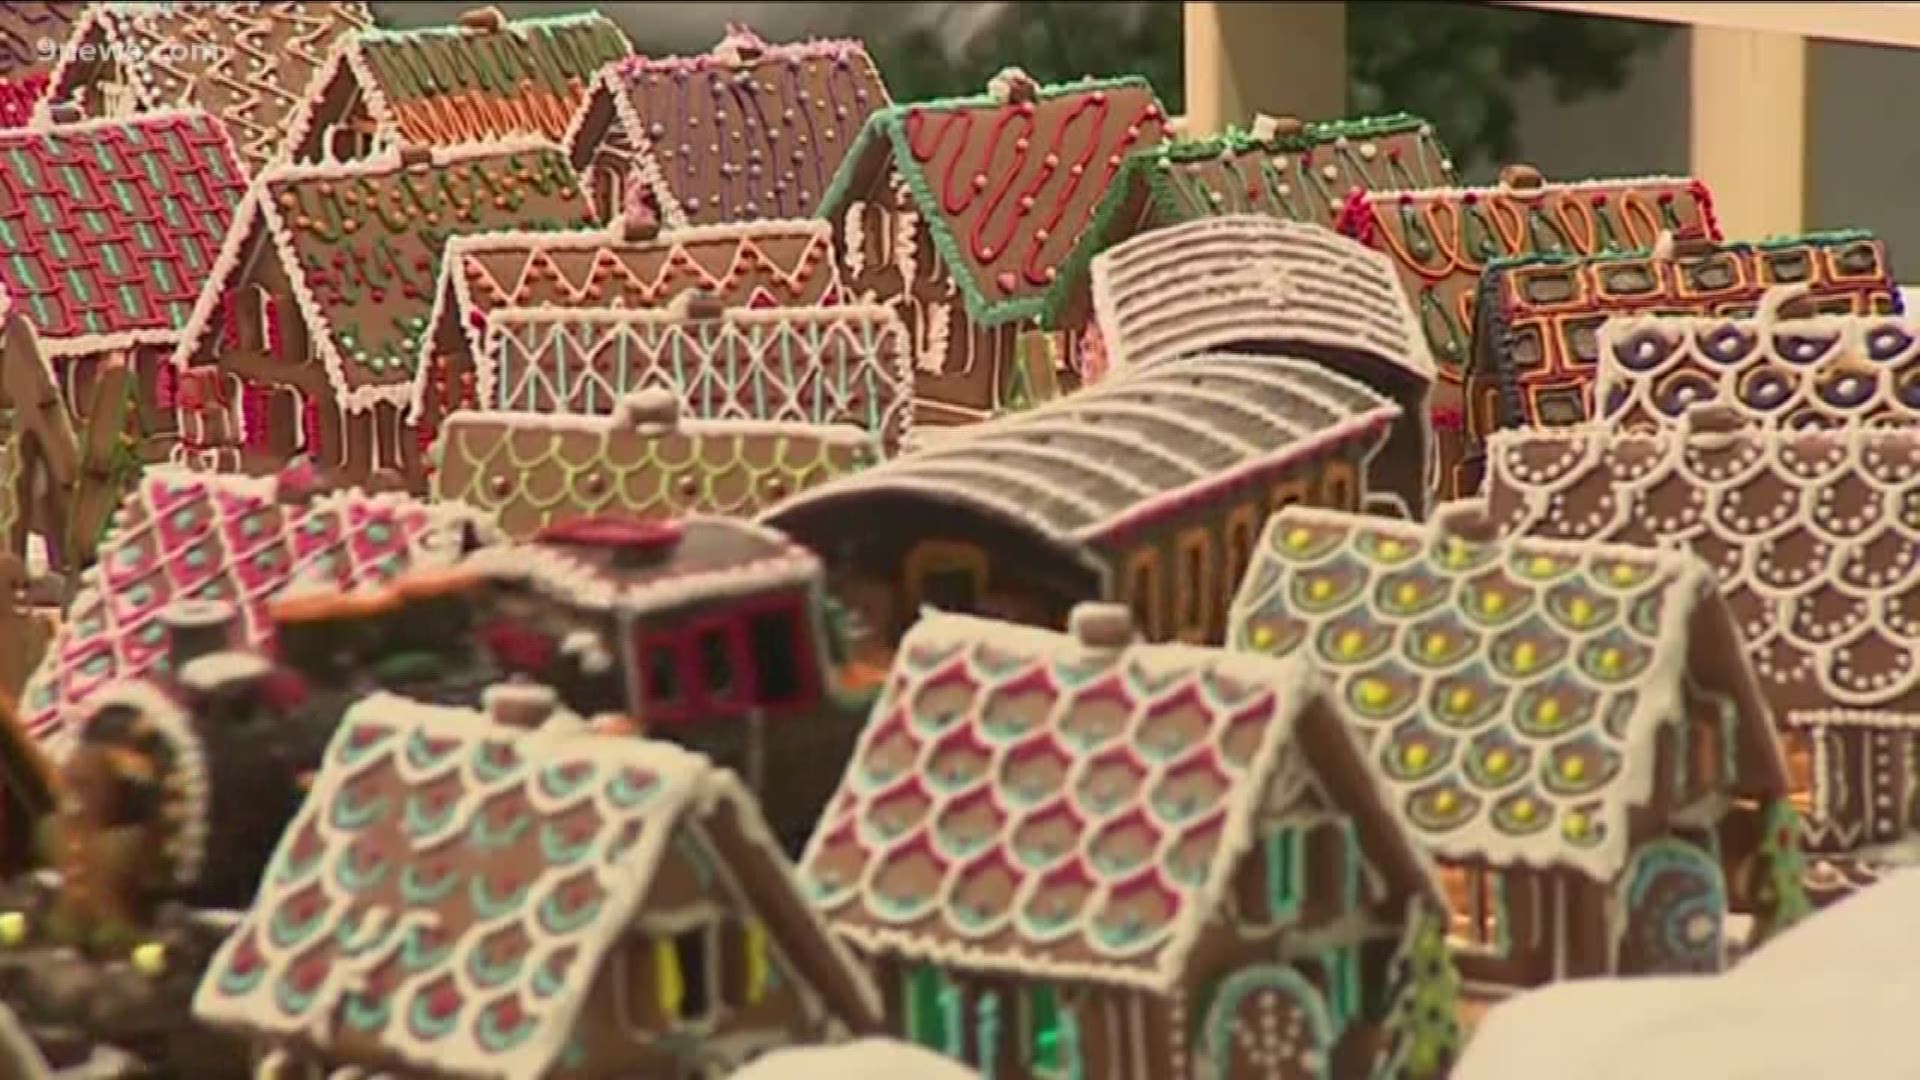 An 860-square-foot gingerbread town is on display in Poland. More than 30 artists built the model biscuit town and a lot of the items on display were molded by hand.